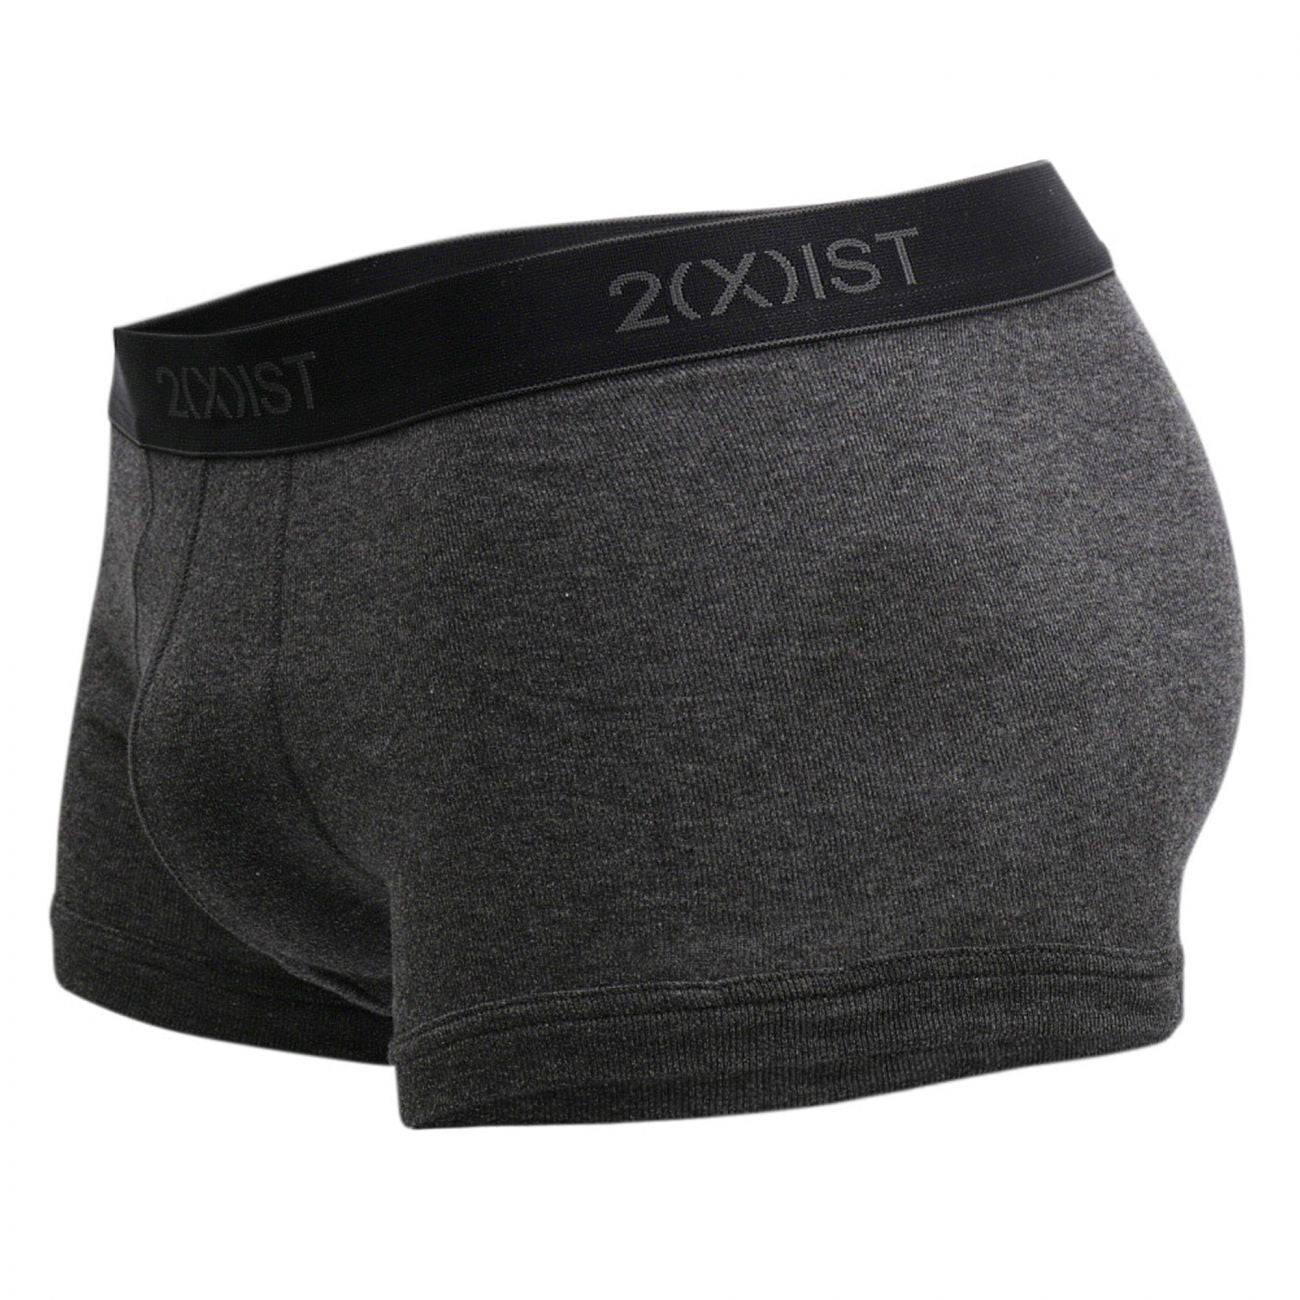 2(X)IST 3102033303 Cotton 3PK No-Show Trunks Black Charcoal Red